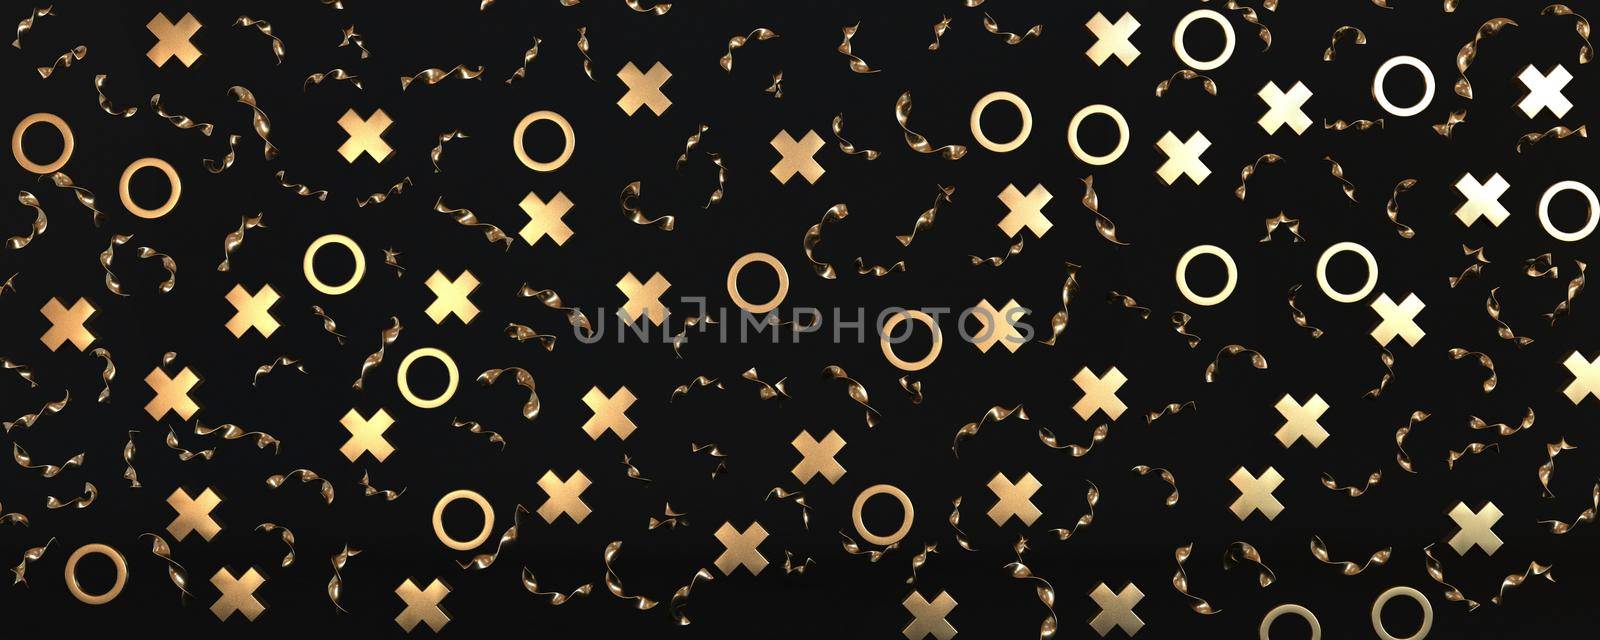 Golden confetti 3D rendering illustration isolated on black background